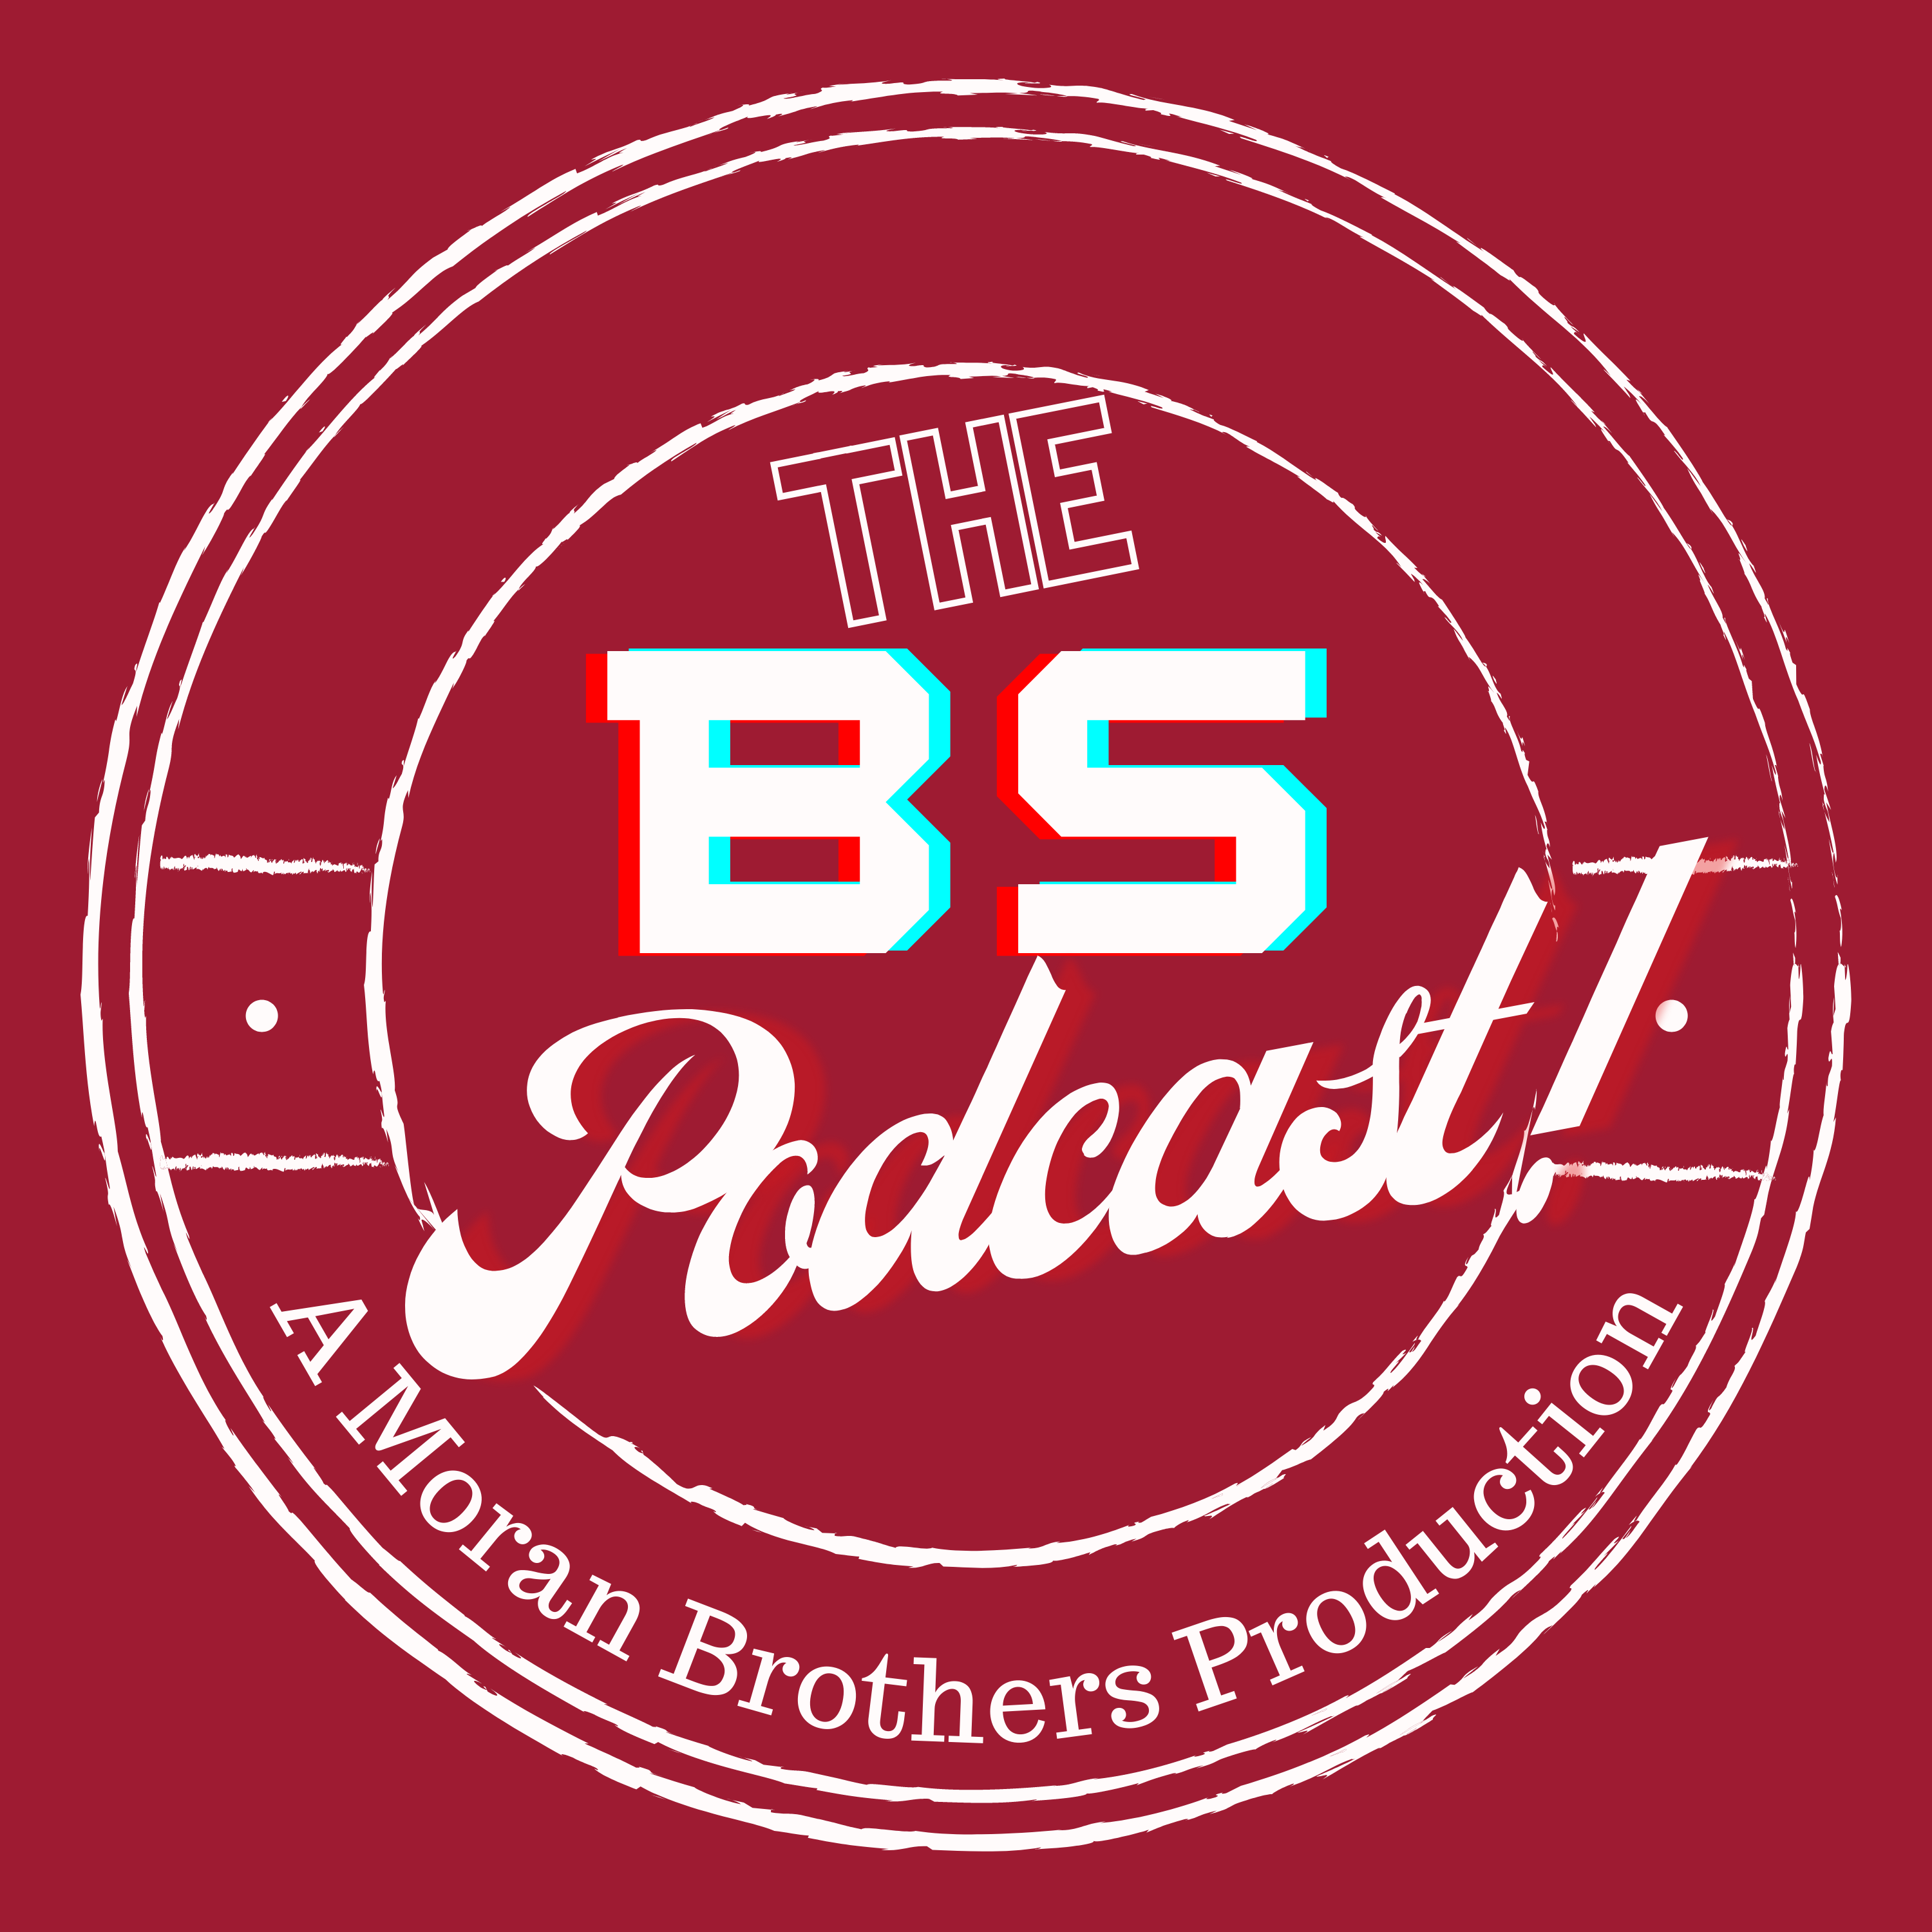 BS Podcast - Listener comments